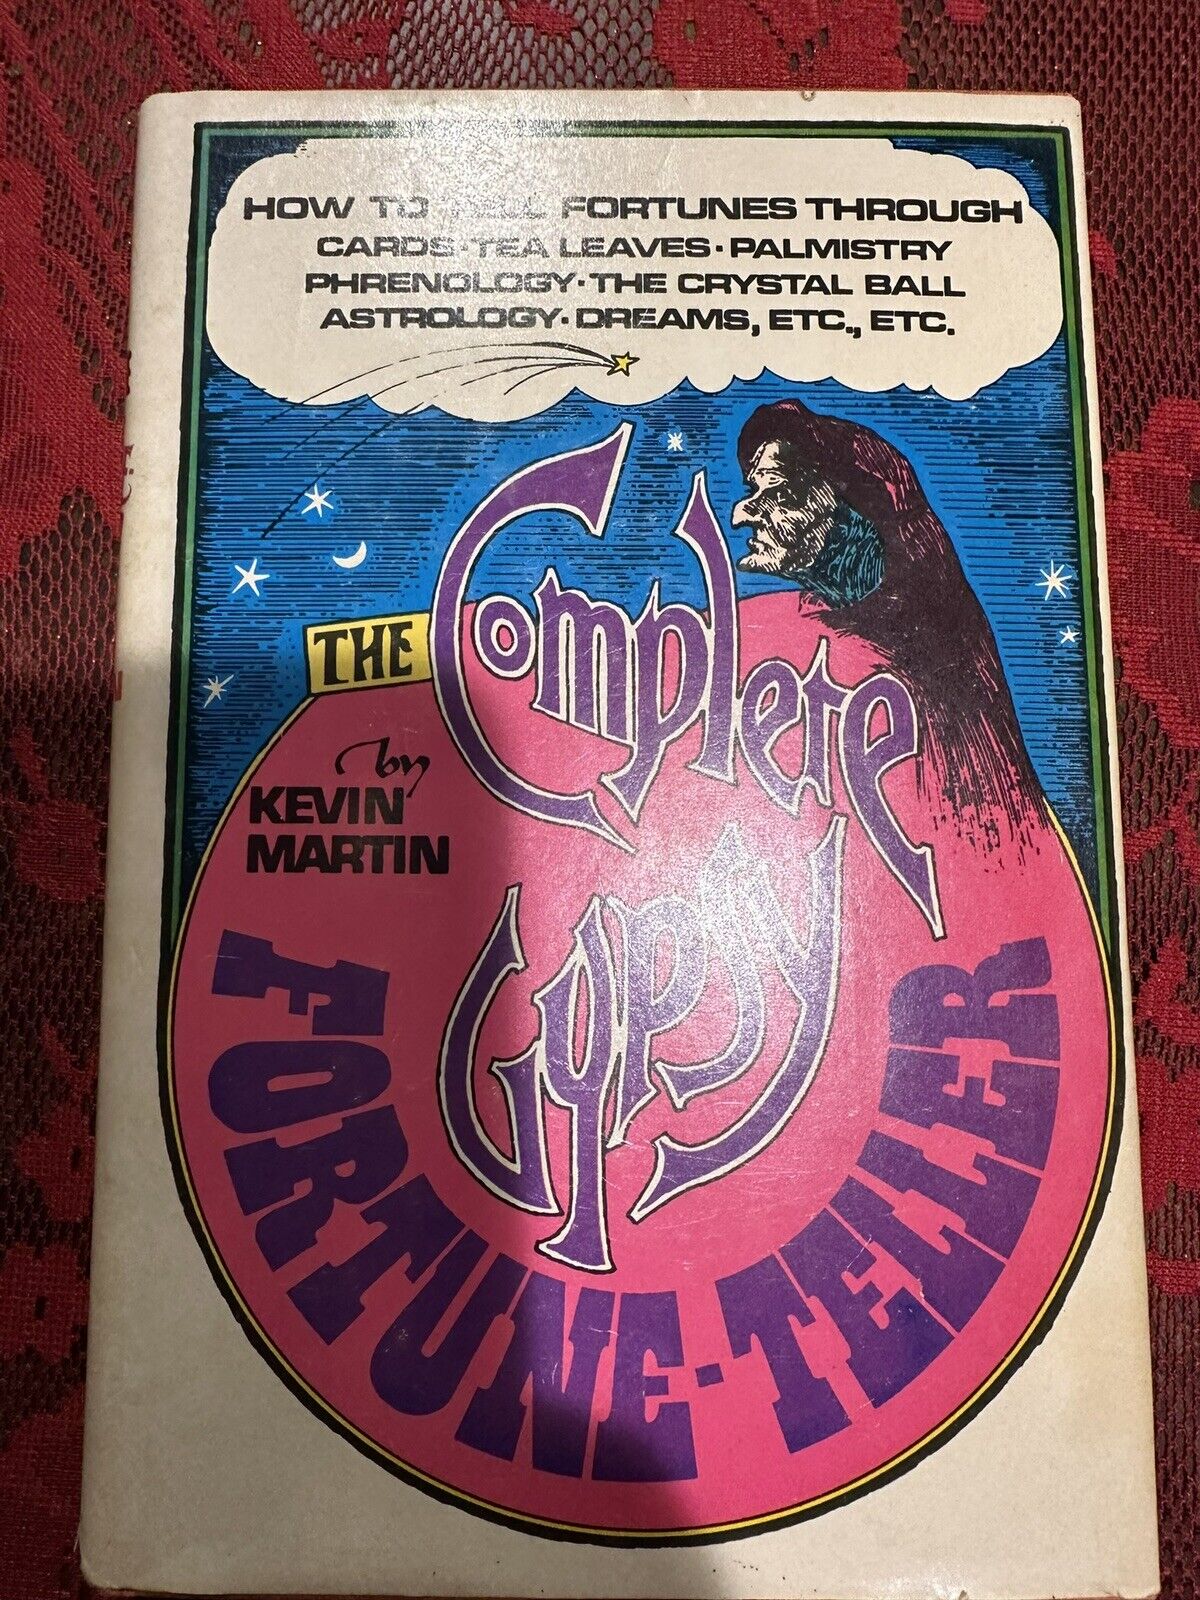 The Complete Gypsy Fortune teller by Kevin Martin hardcover book